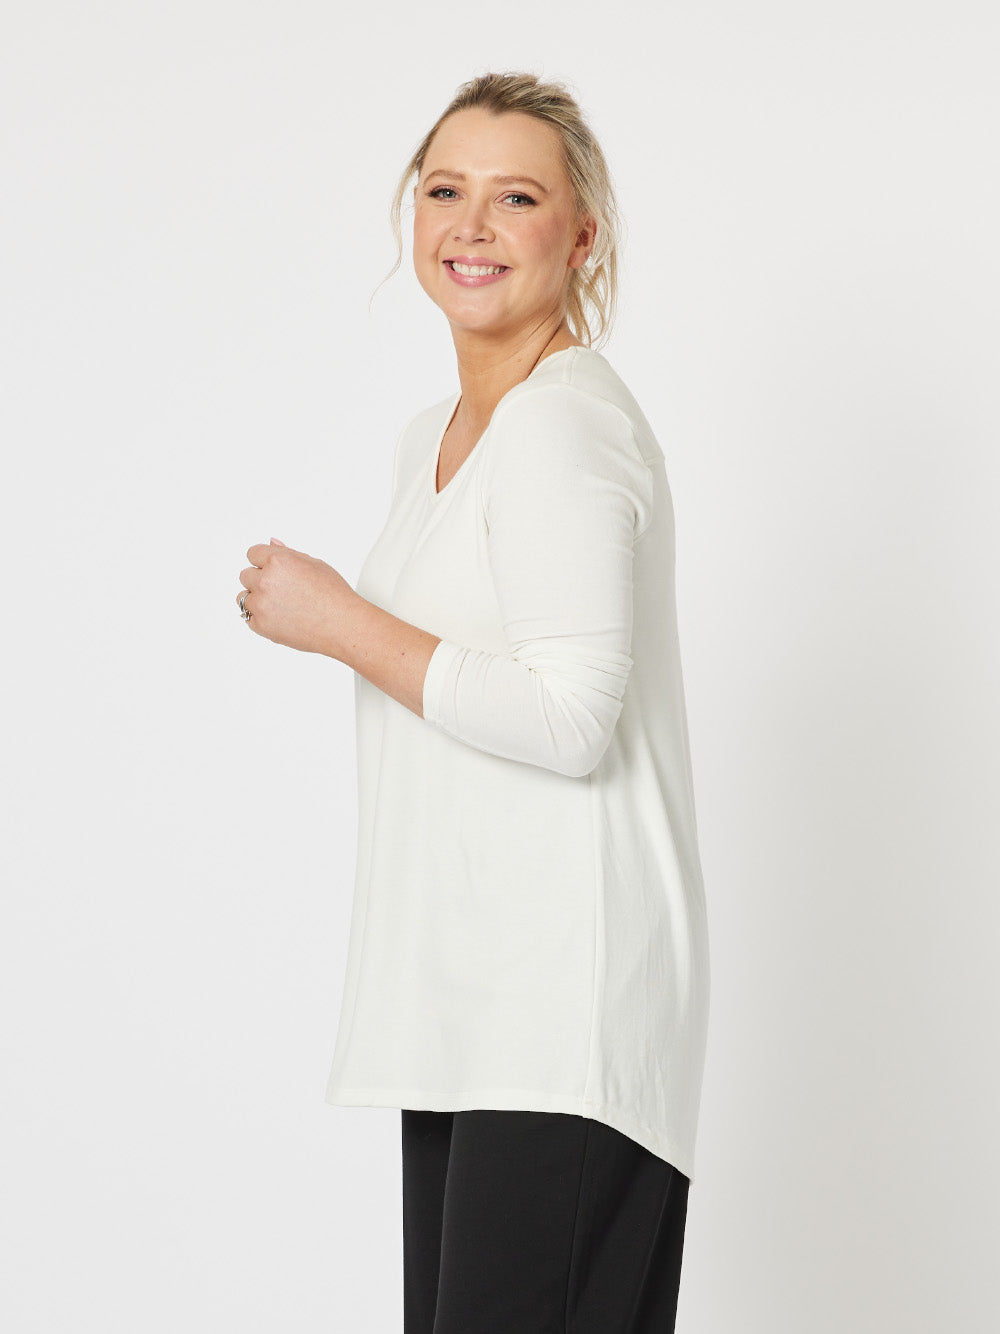 Keely Long Sleeve Top - Ivory